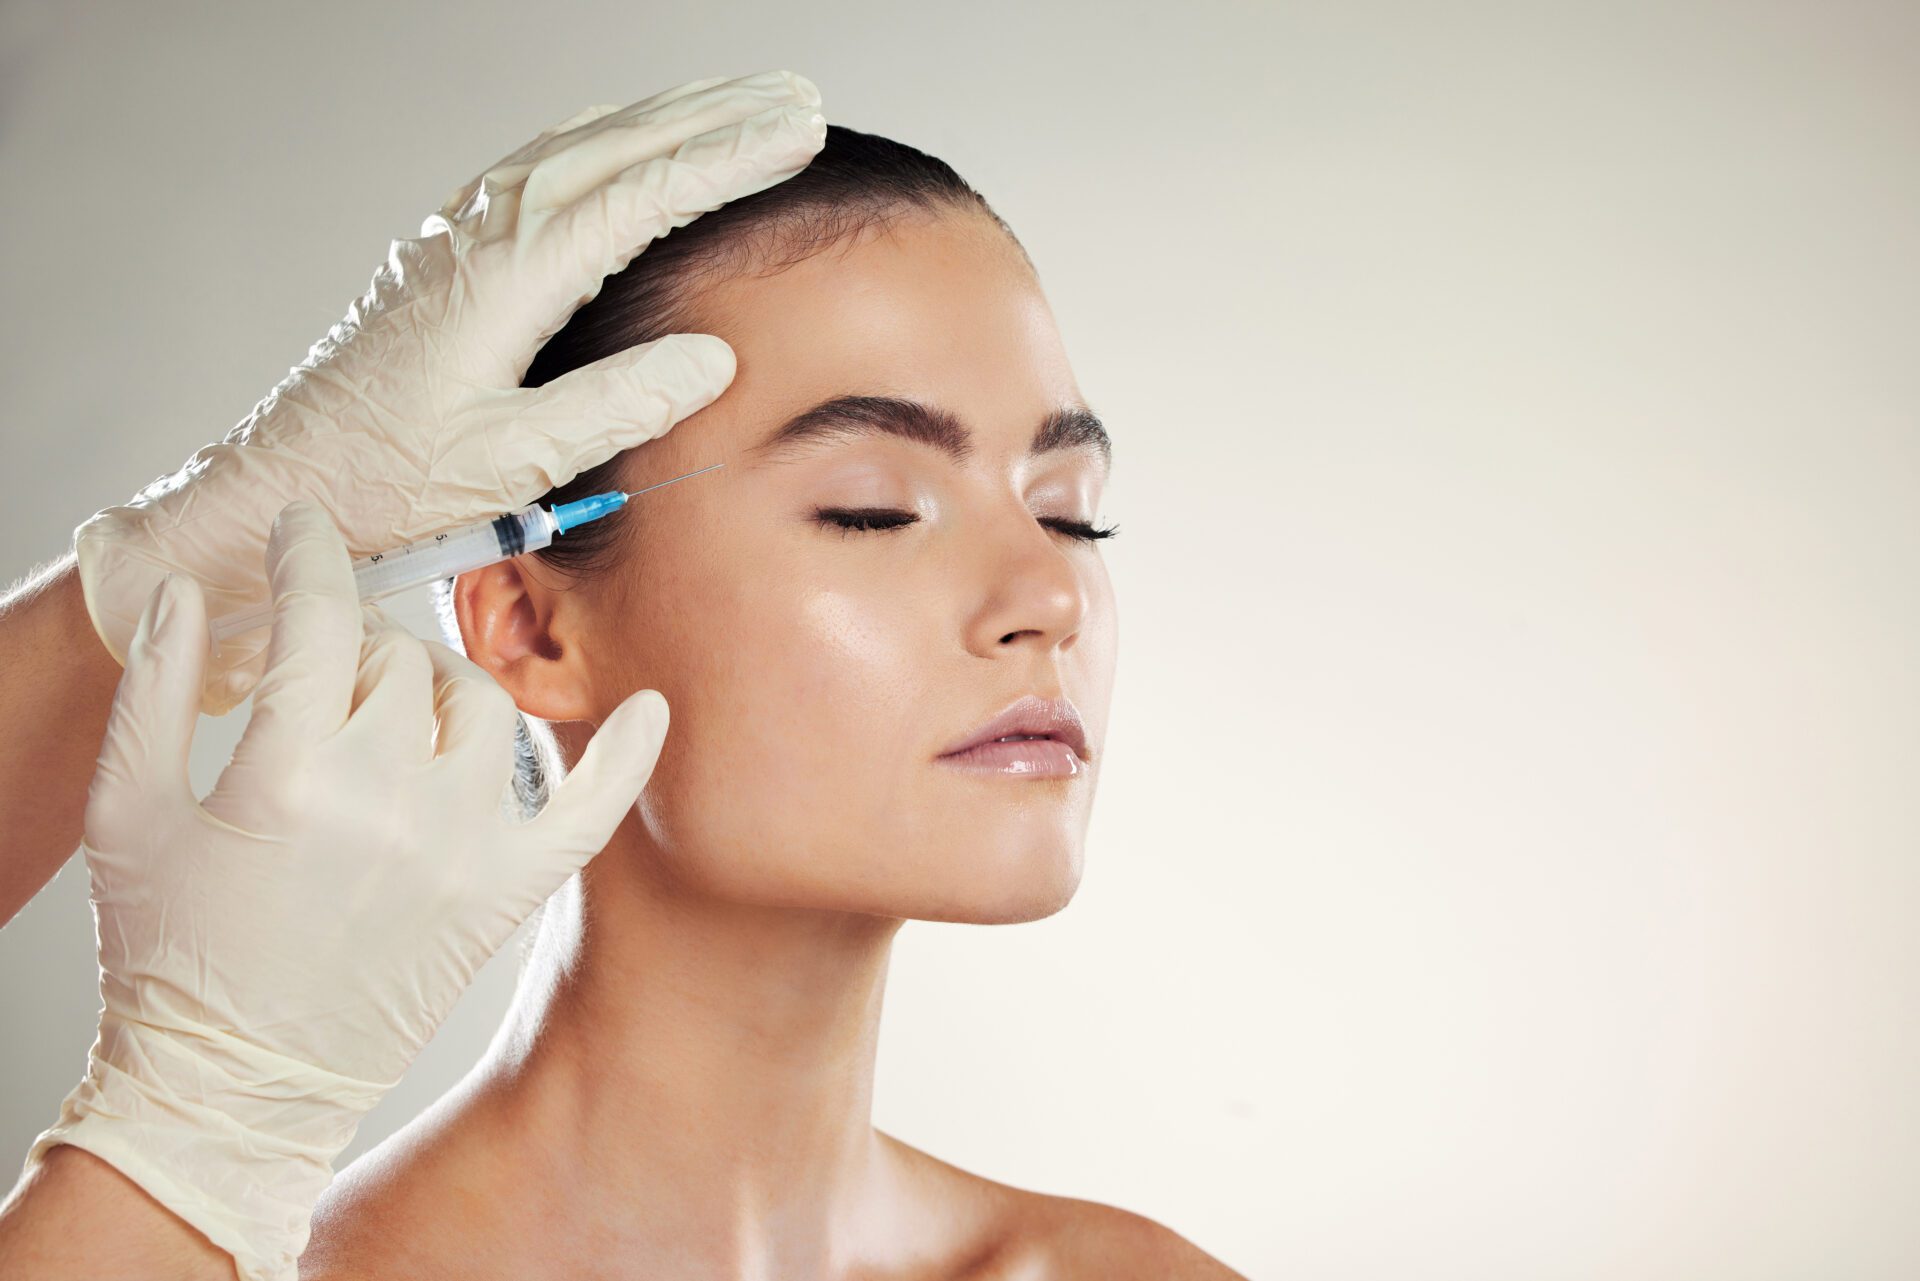 Wrinkle Relaxers | Botox Injections in West Palm Beach, FL